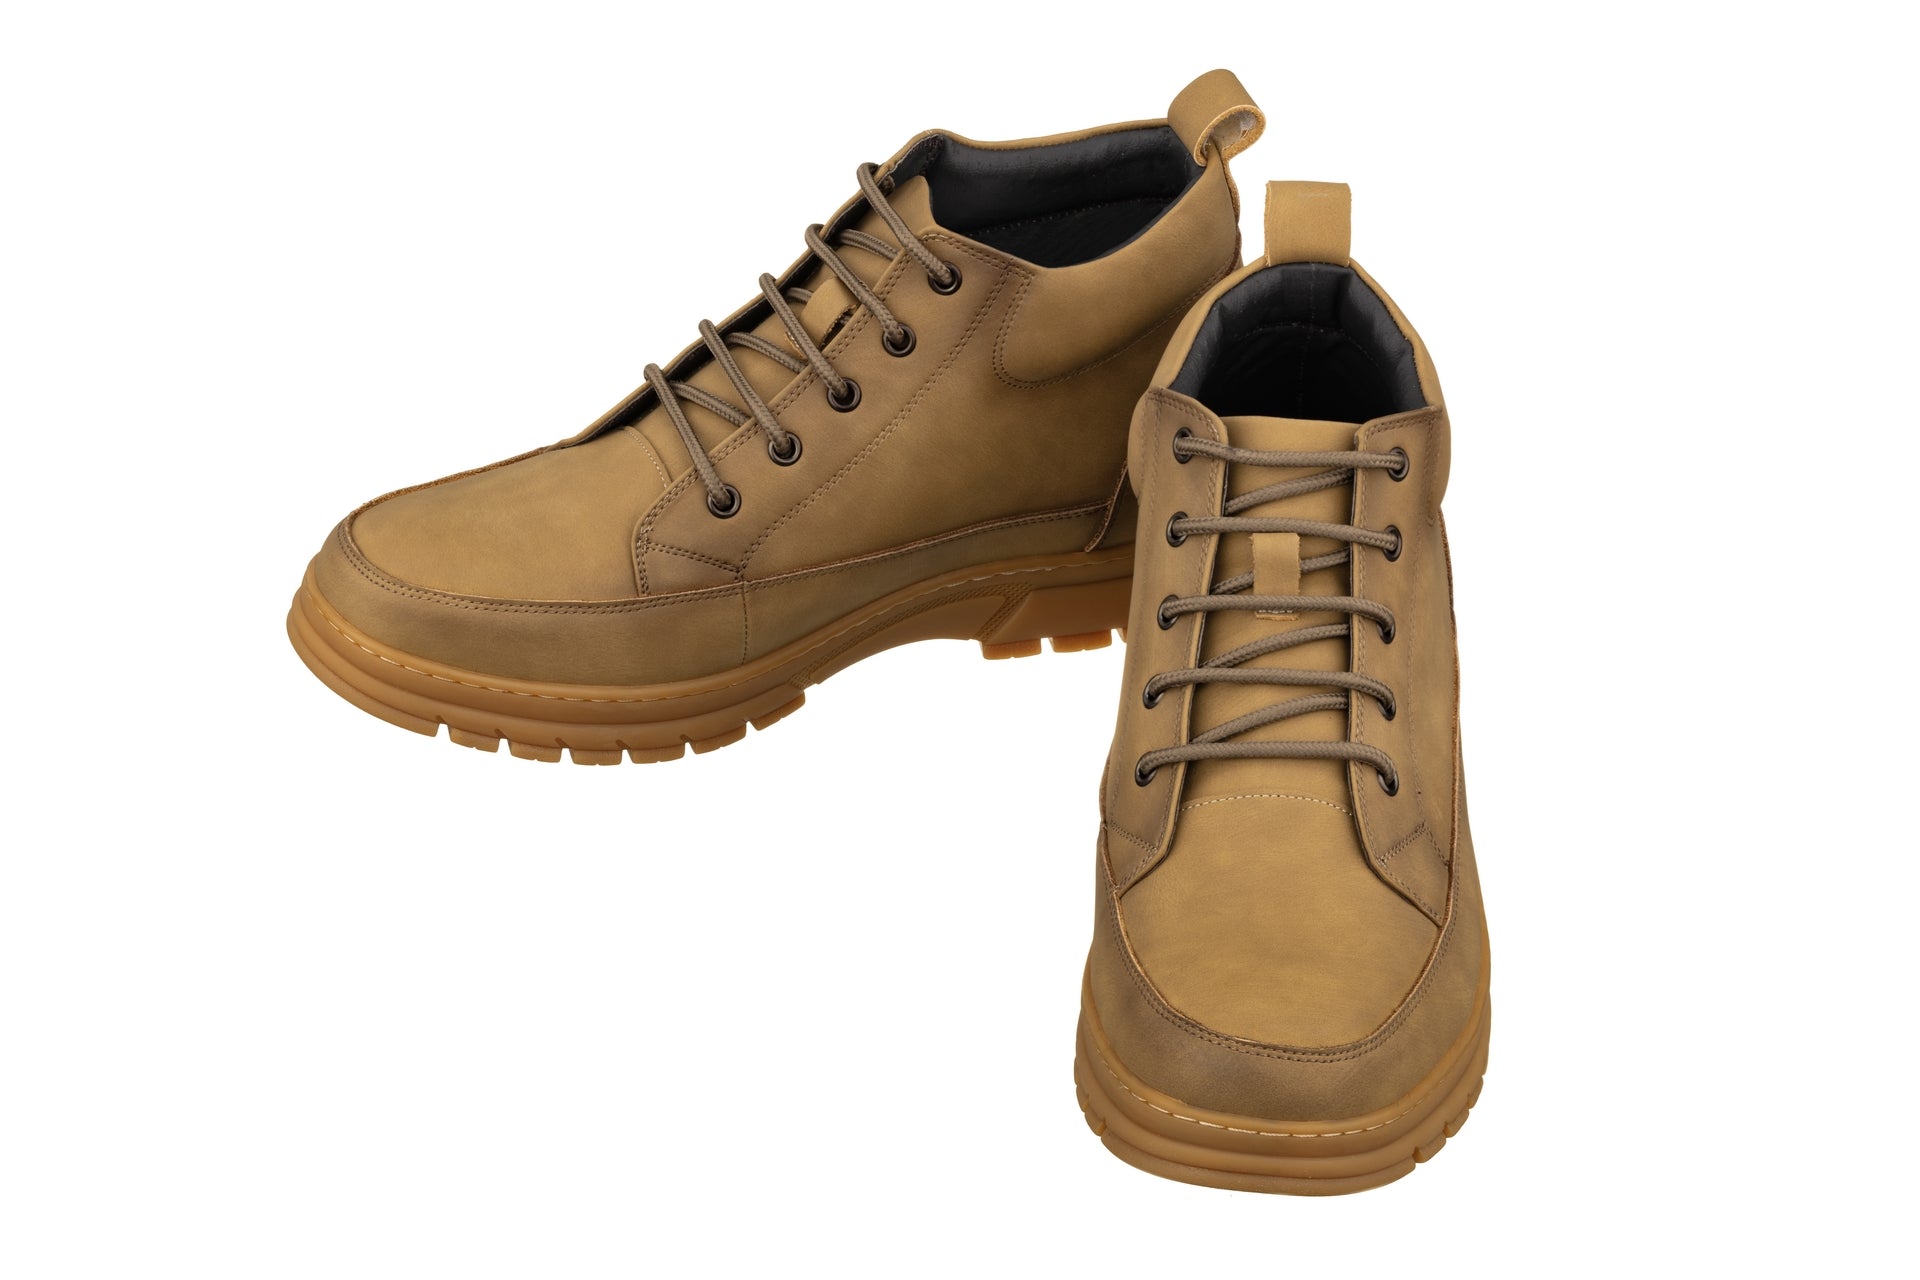 Elevator shoes height increase TOTO - K11552 - 2.8 Inches Taller (Khaki) - Casual Hiker Boots